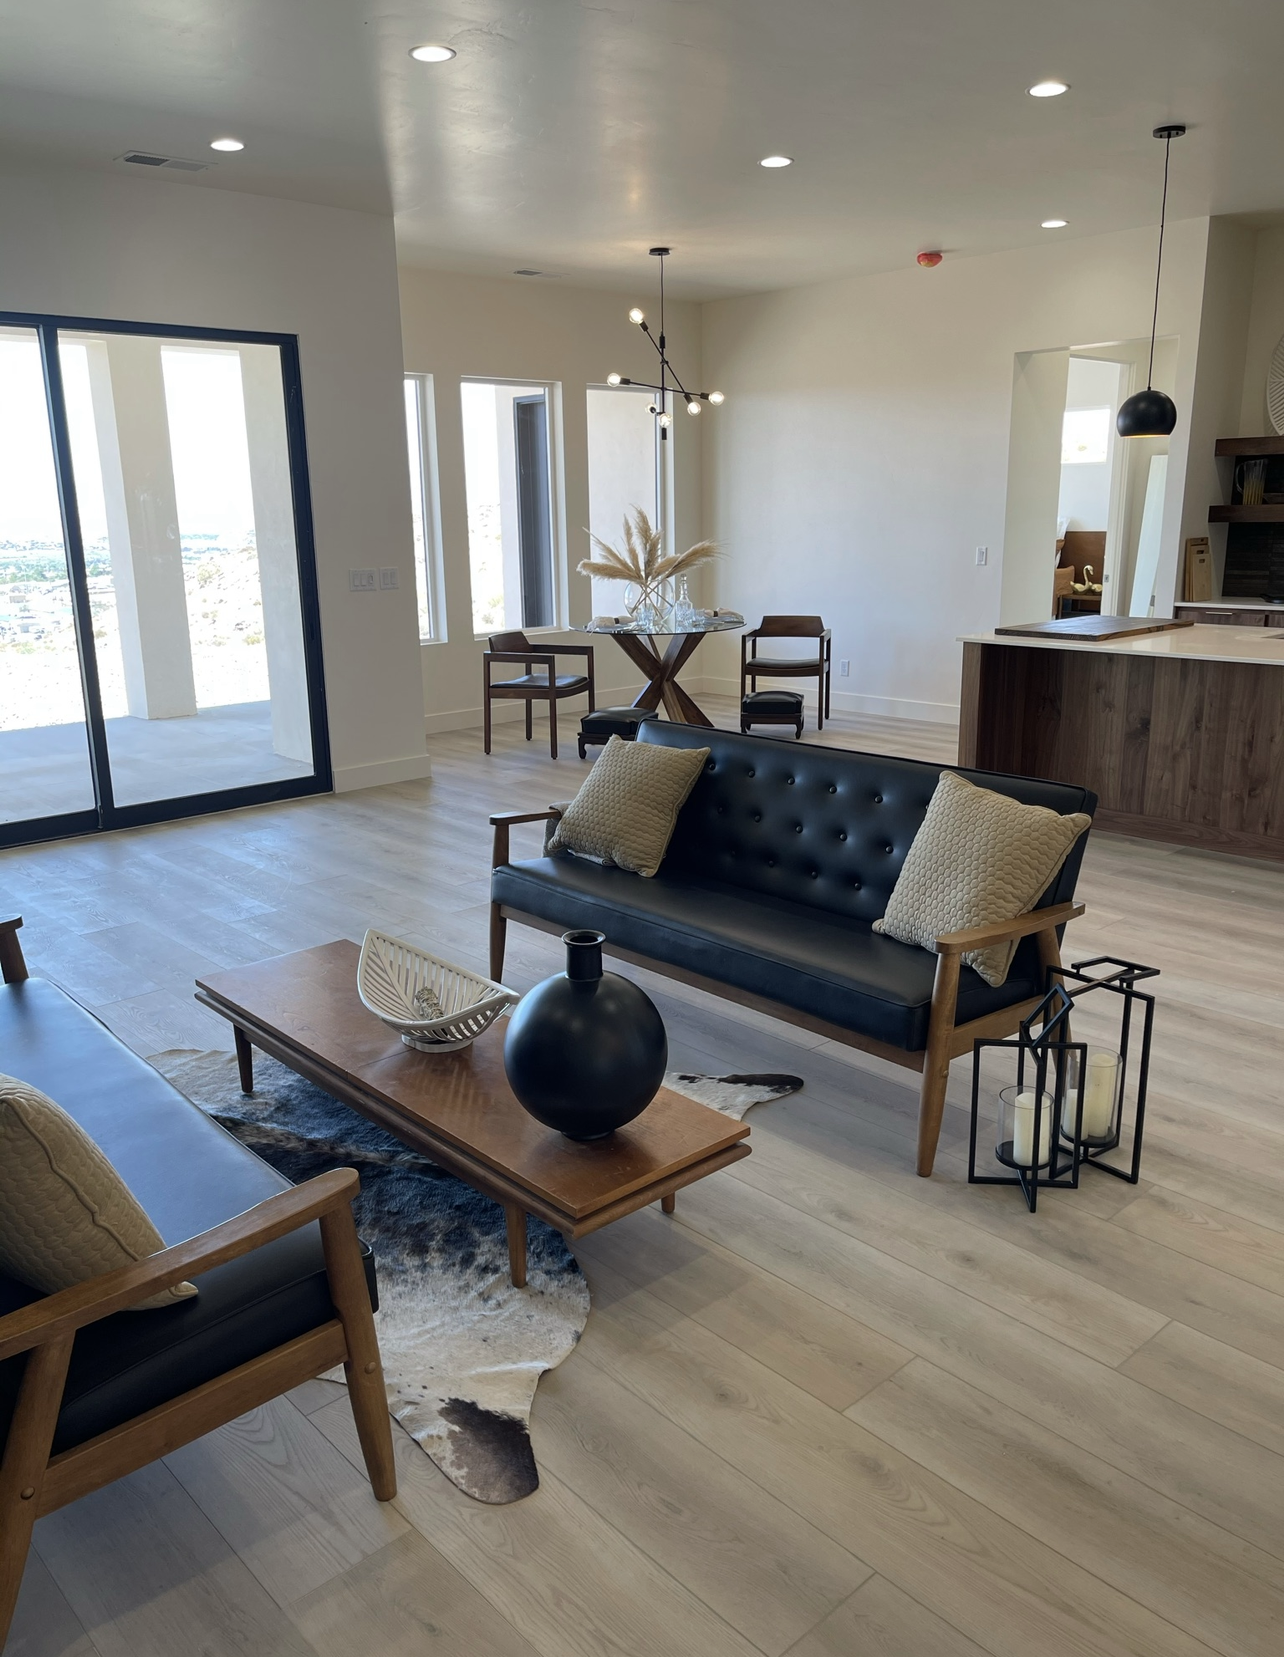 Photo of Hewn Join Elite Stoneform Plank Flooring in a Living Room